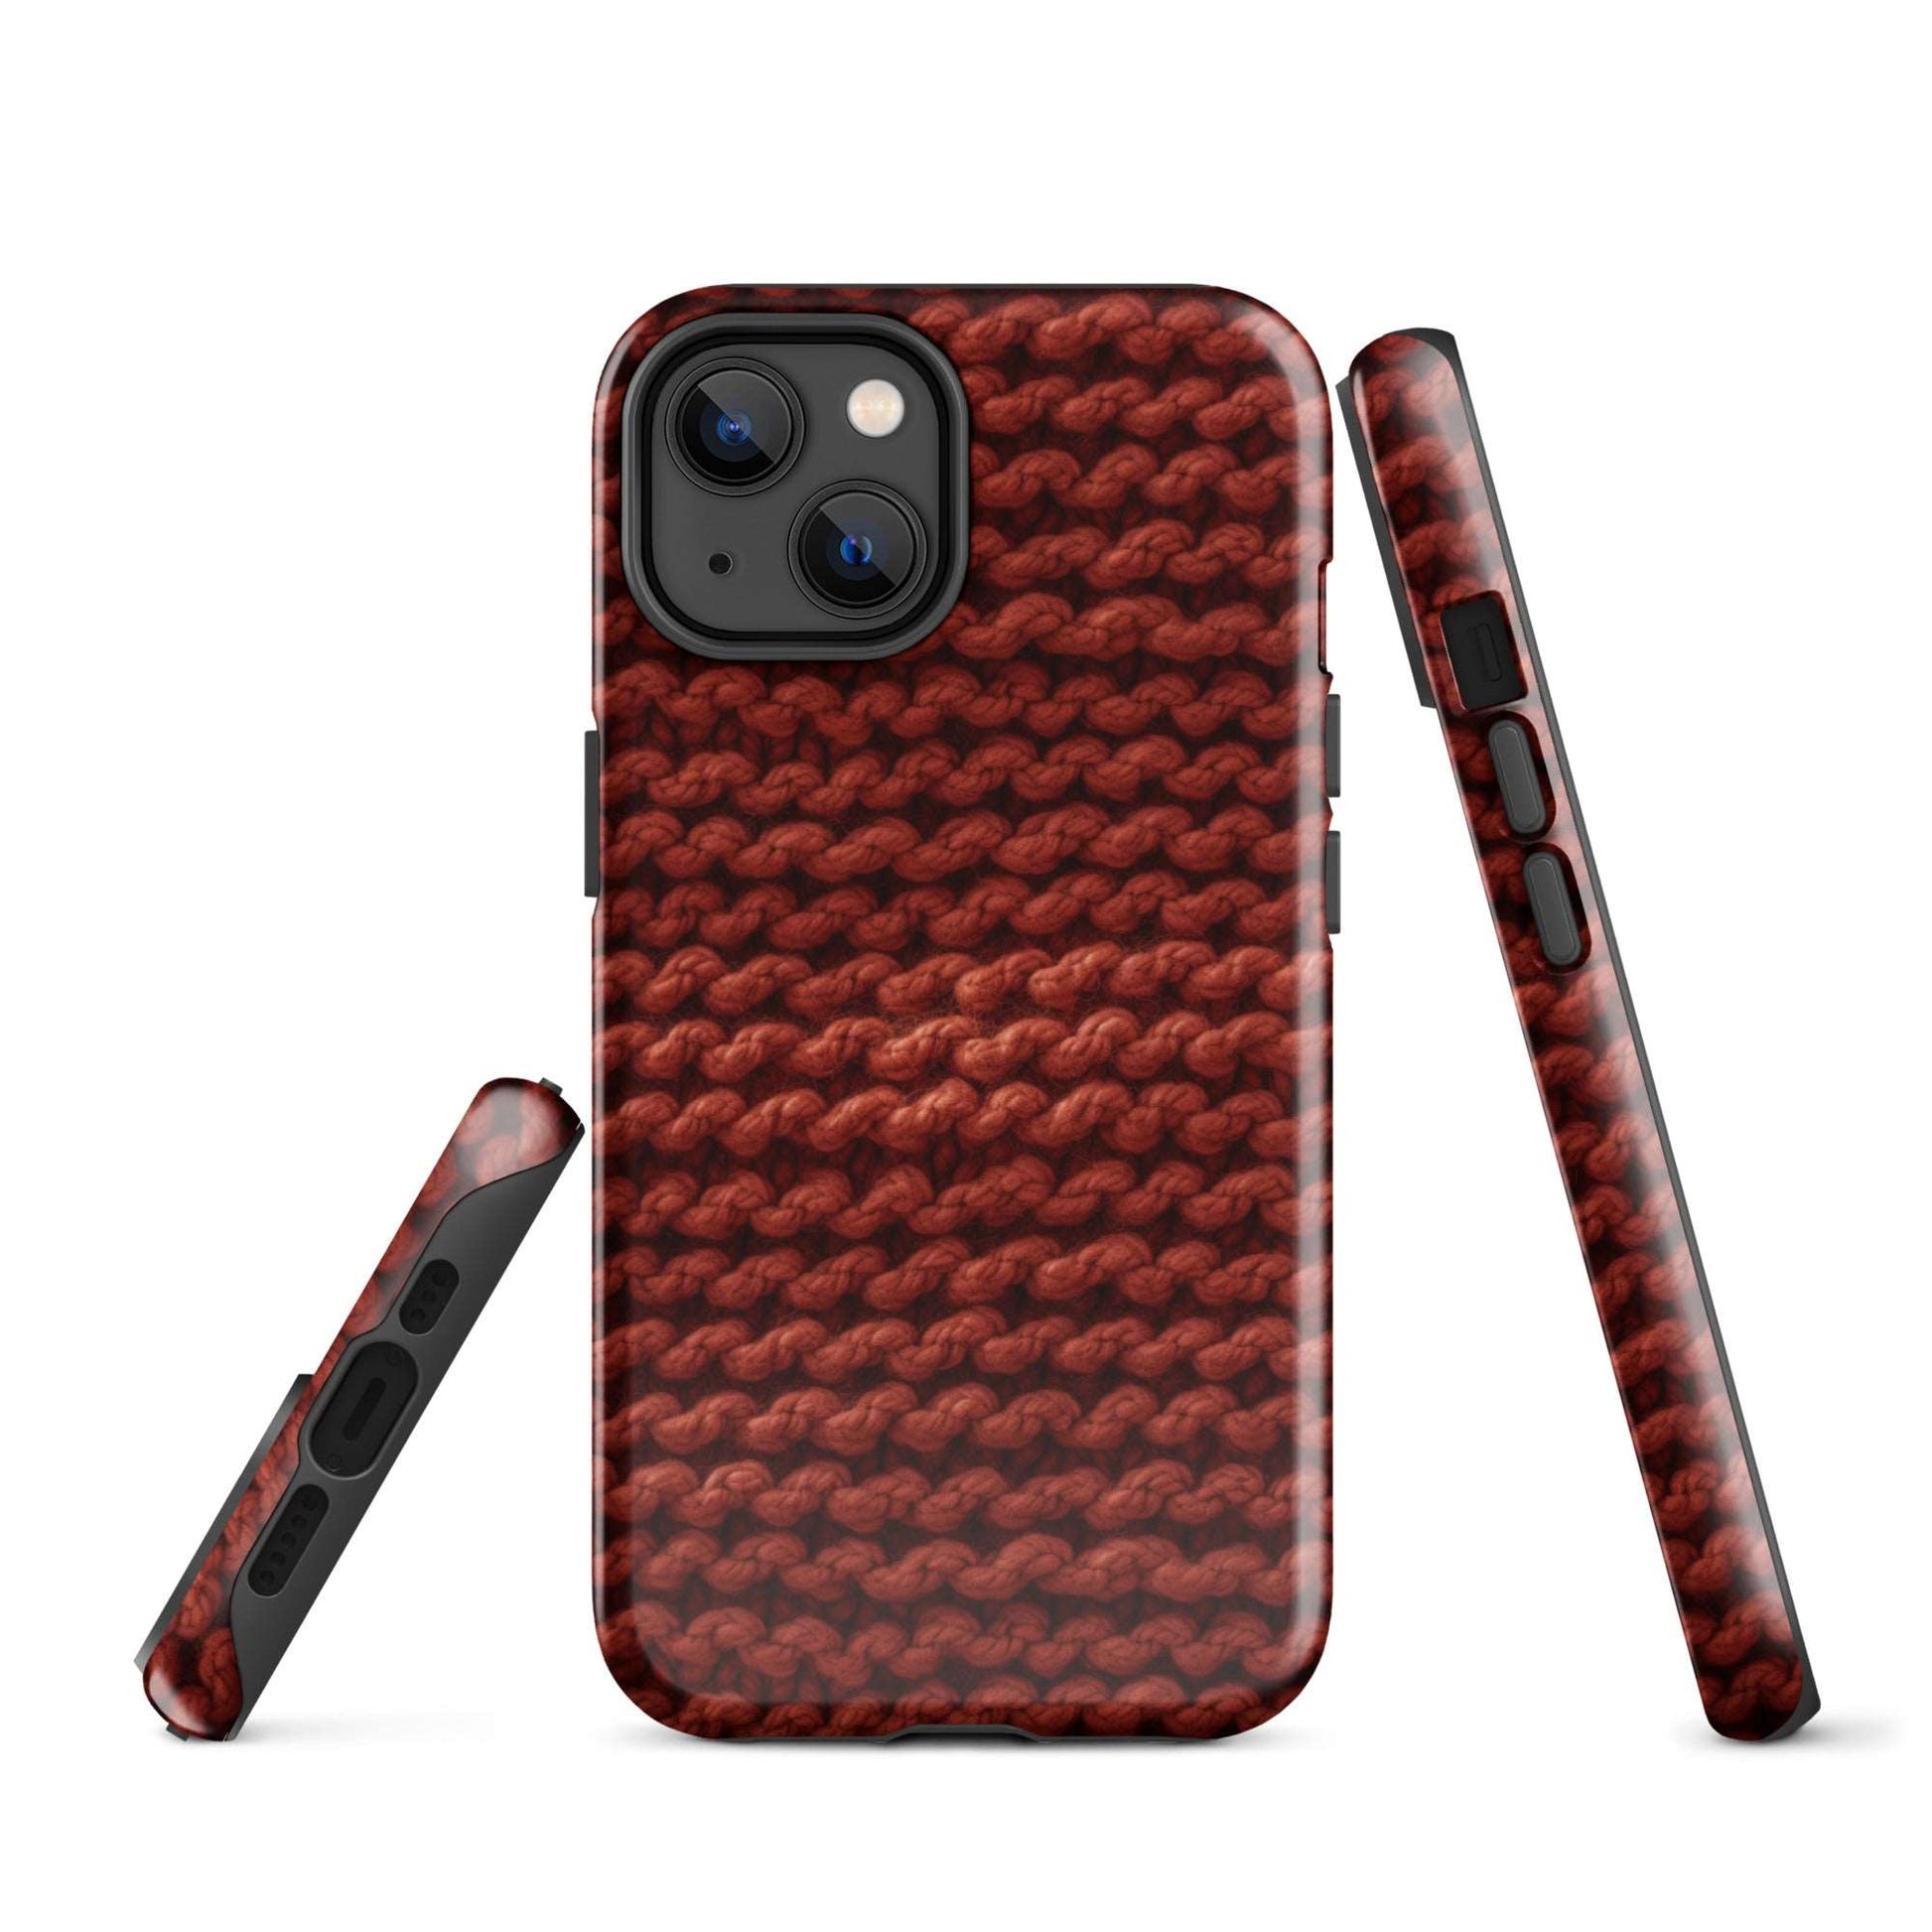 Autumn Yarn Chronicles - Warmth and Tradition iPhone Case - Pattern Symphony